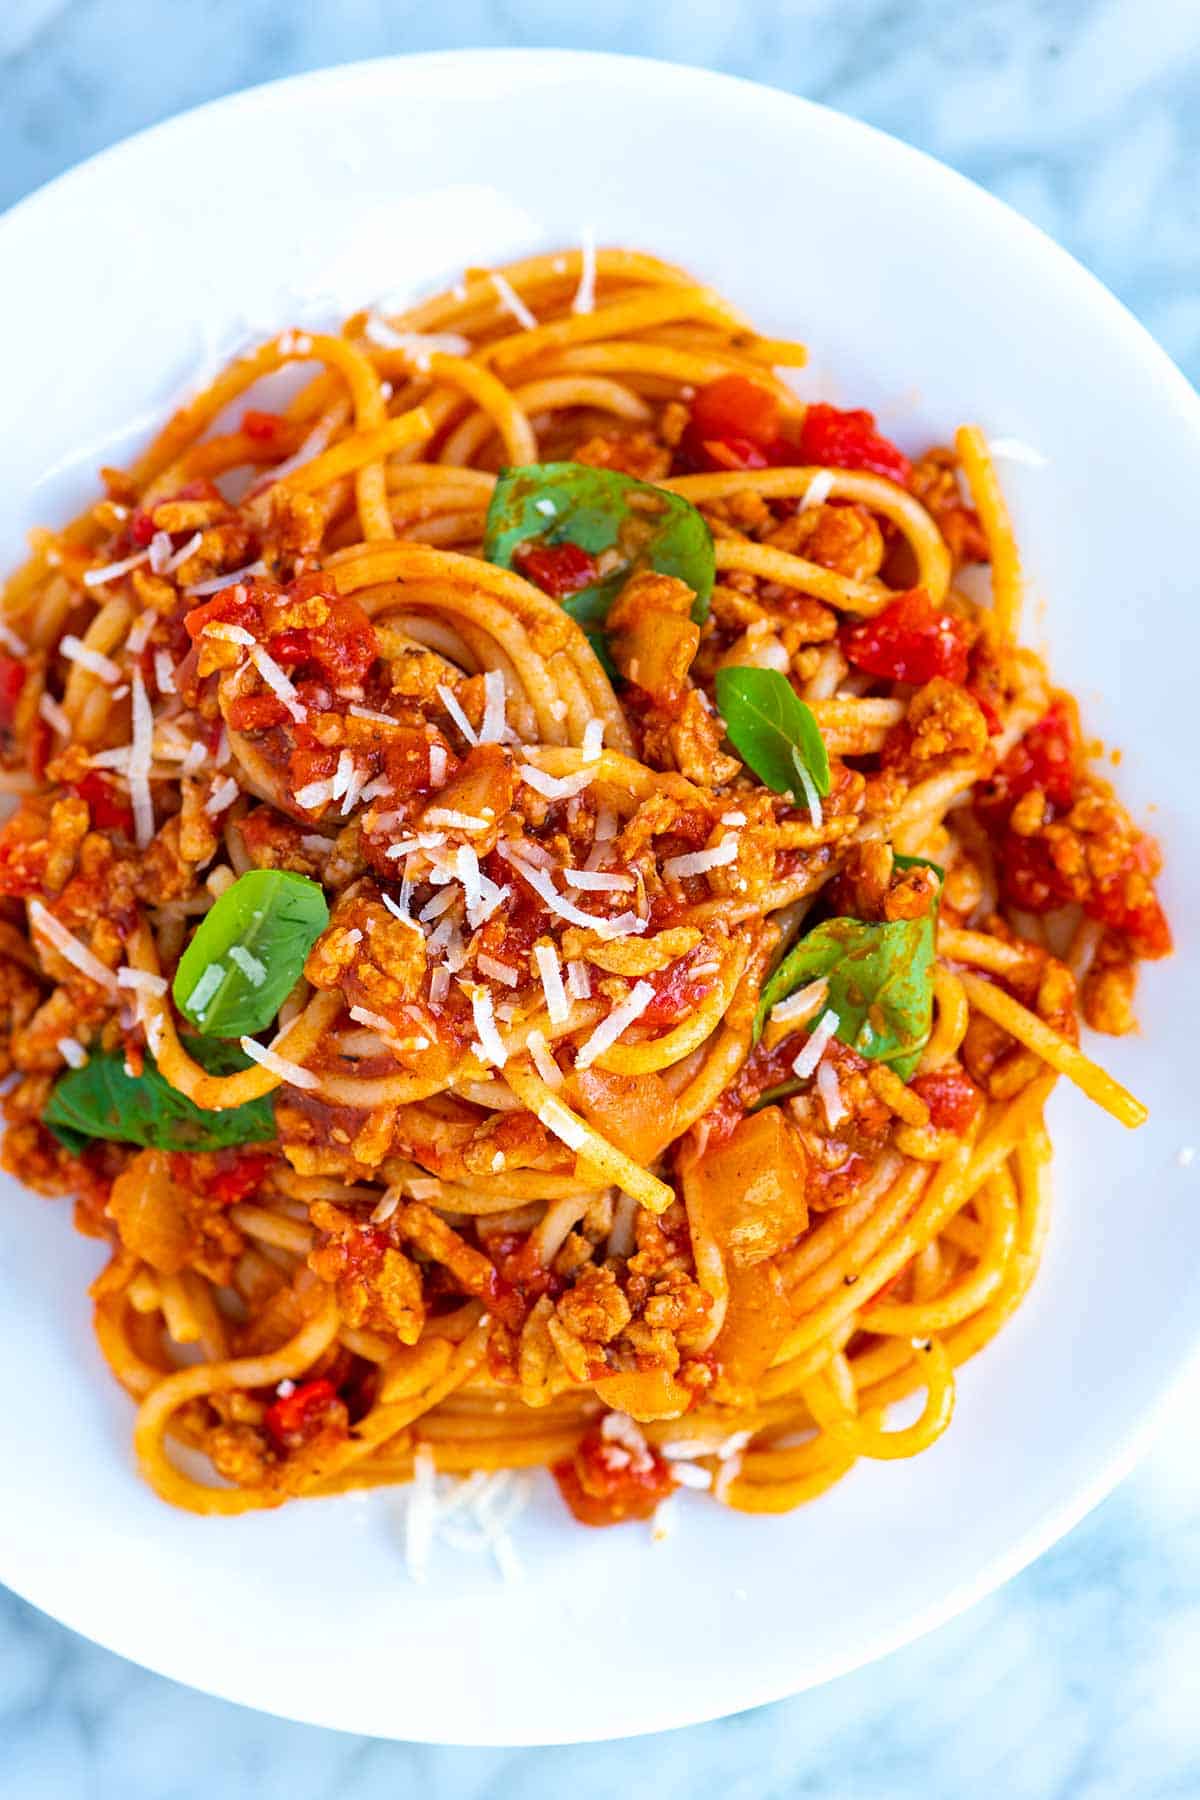 What Kind of Ground Beef Do You Use With Spaghetti - Serrano Humet2001